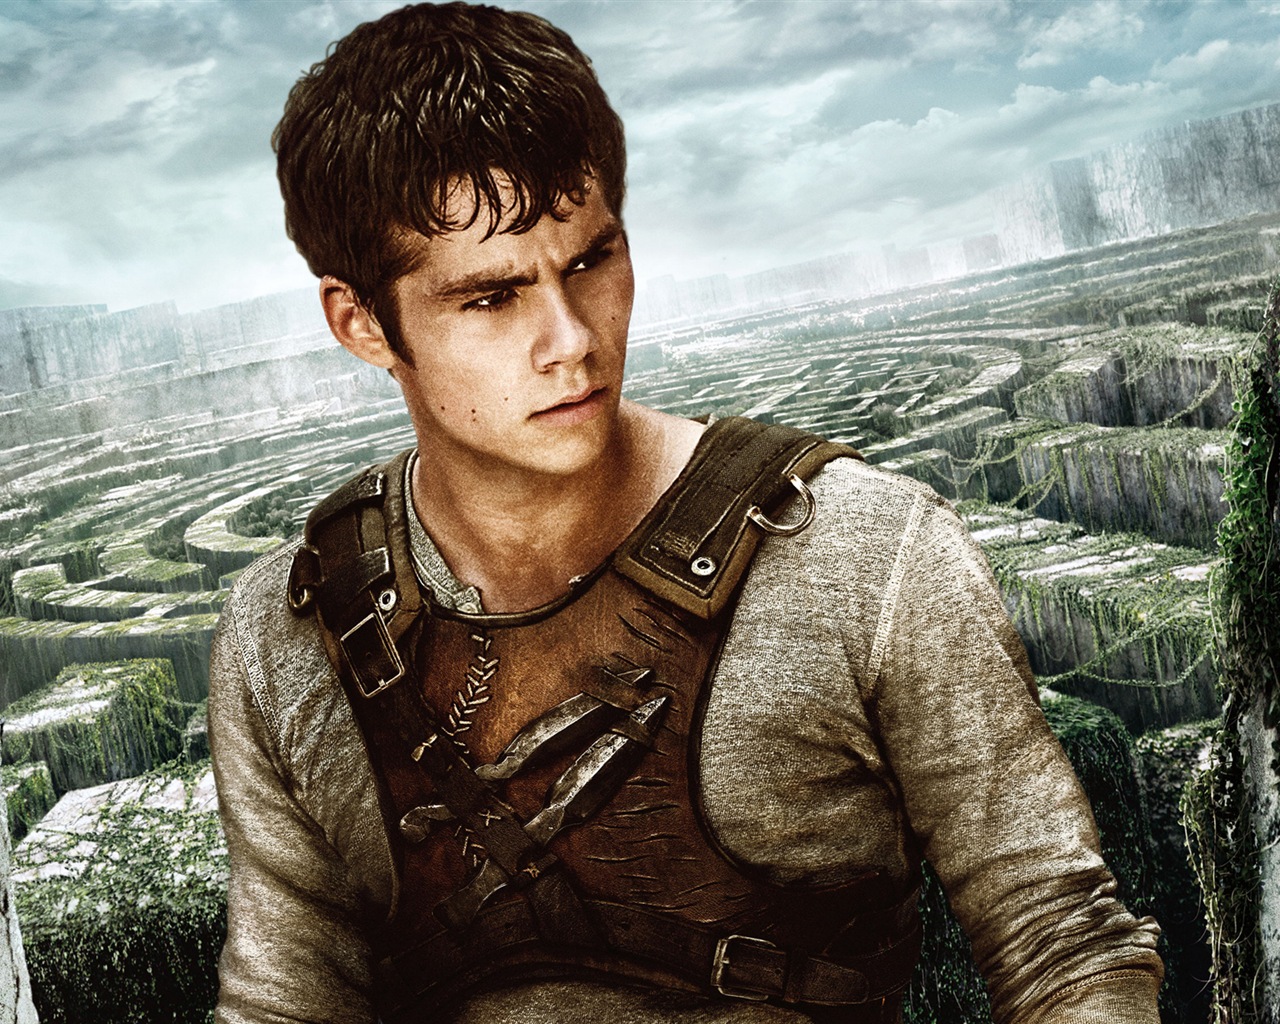 The Maze Runner HD movie wallpapers #7 - 1280x1024